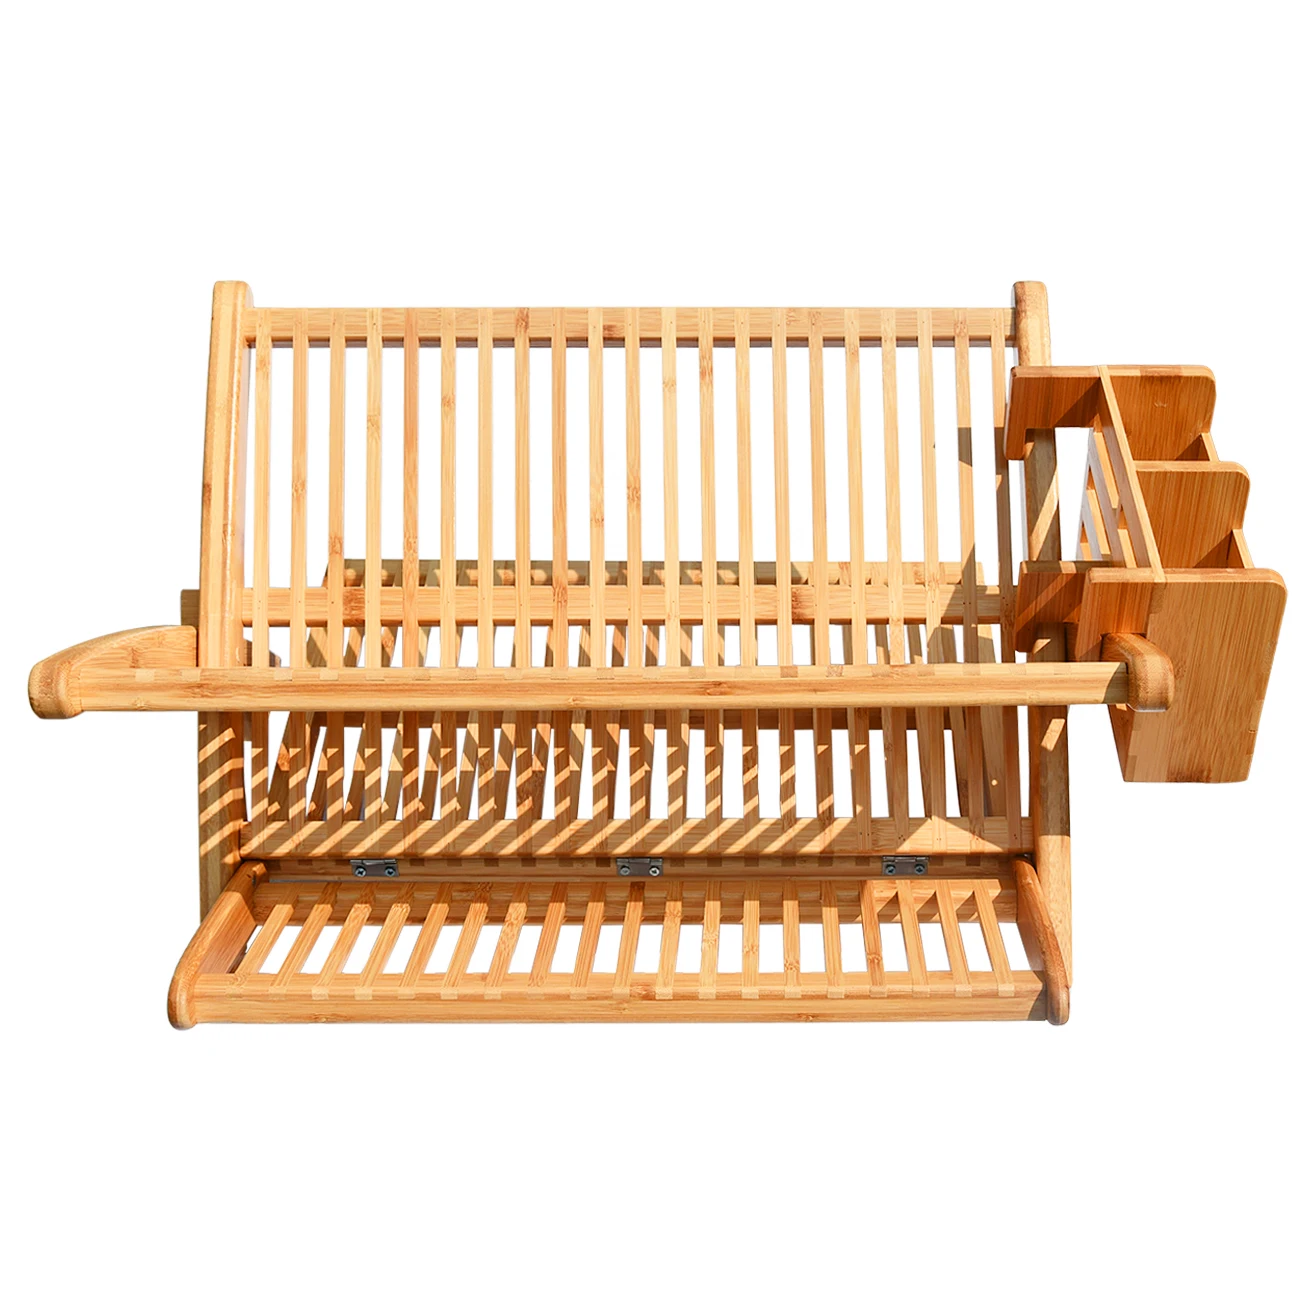 3 Tier Large Collapsible Bamboo Dish Drying Rack with Utensil Holder for Kitchen Plates, Cups, Mugs, Utensil